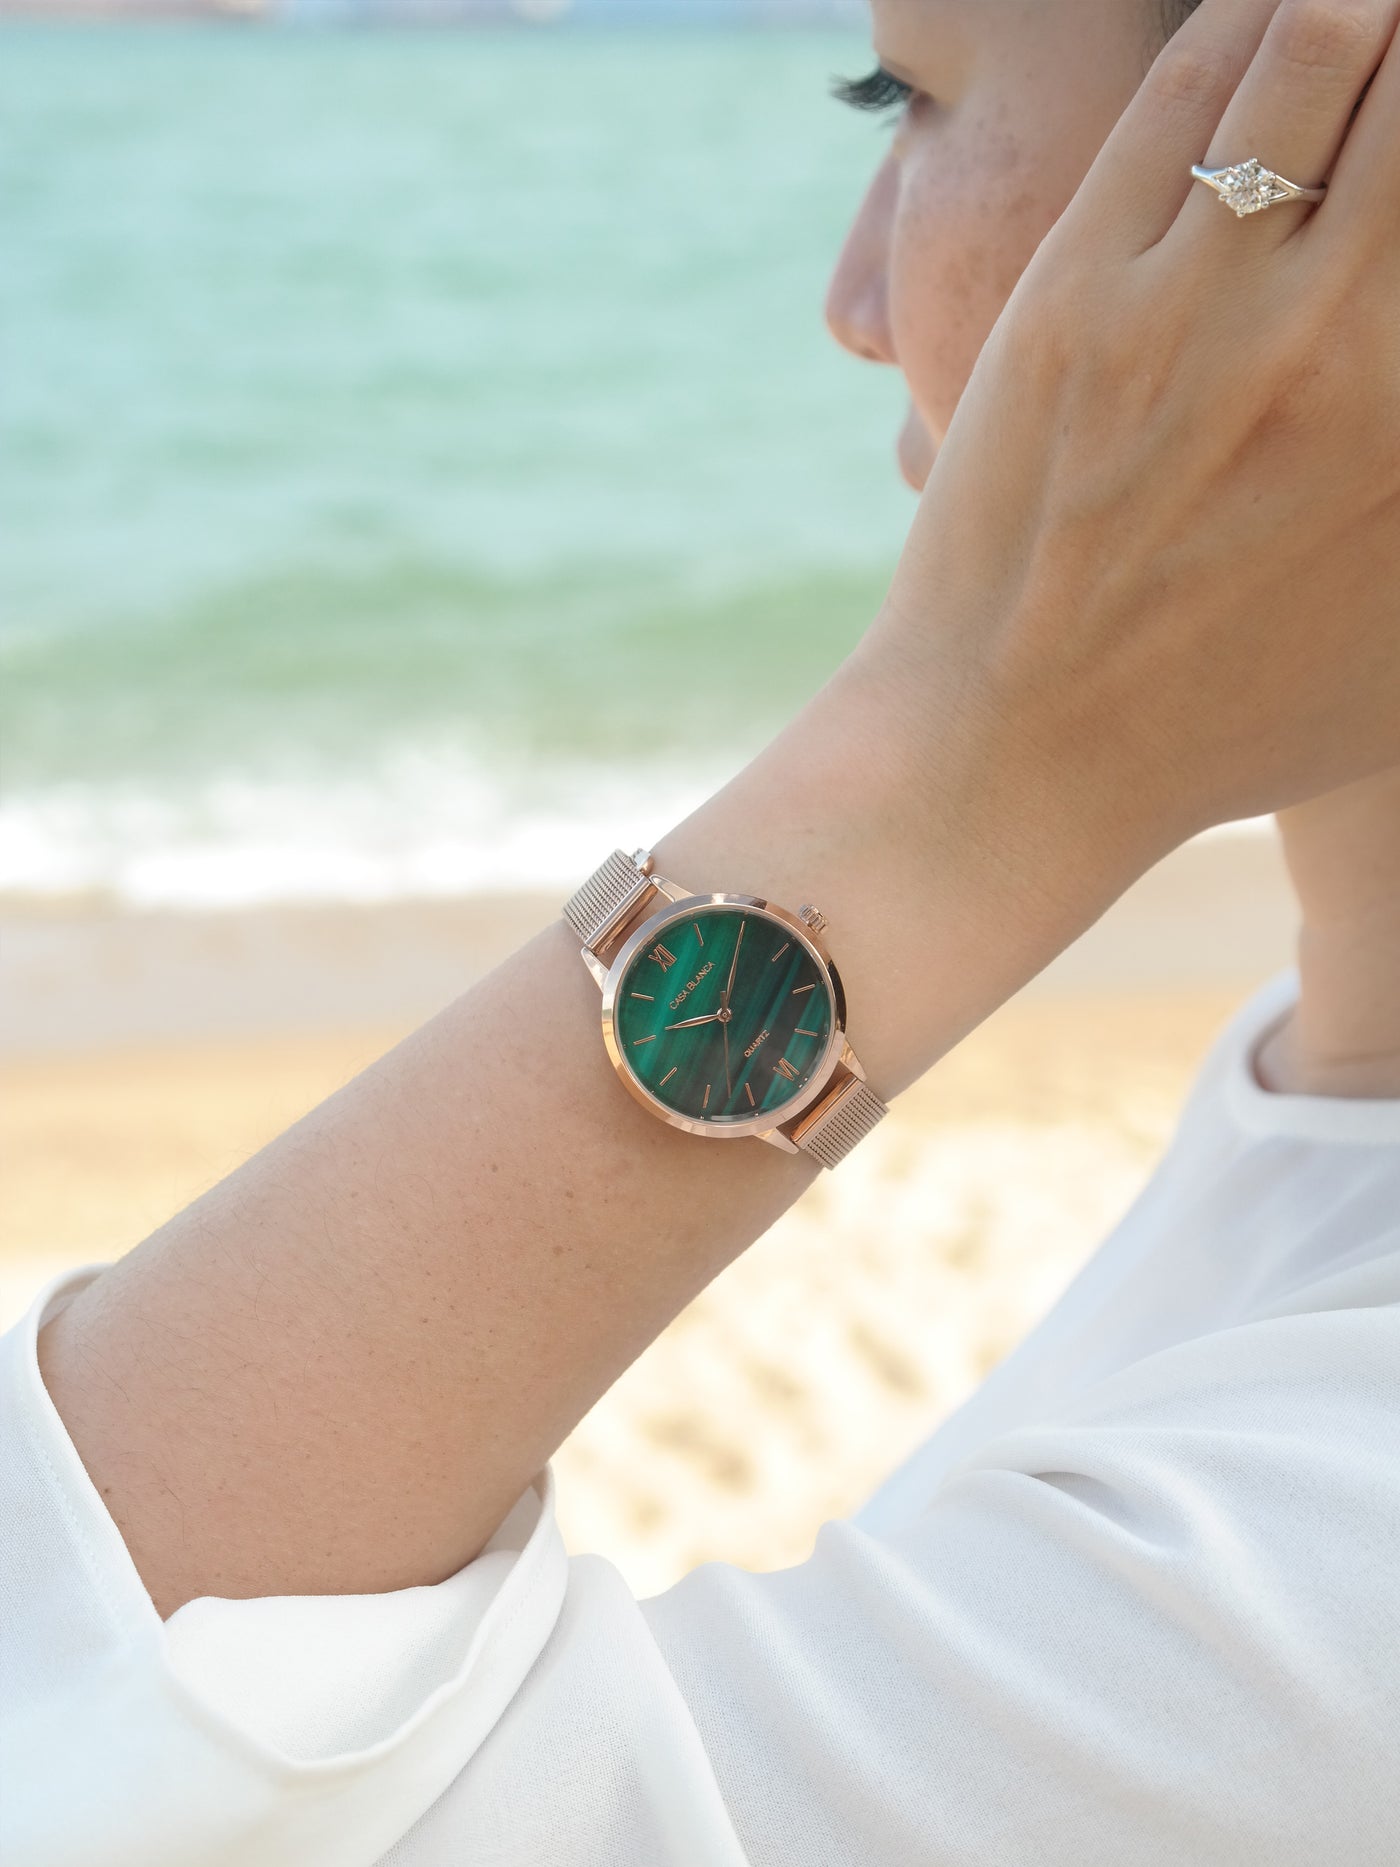 Model with Classic Peacock Green Rose Gold Strap Watch